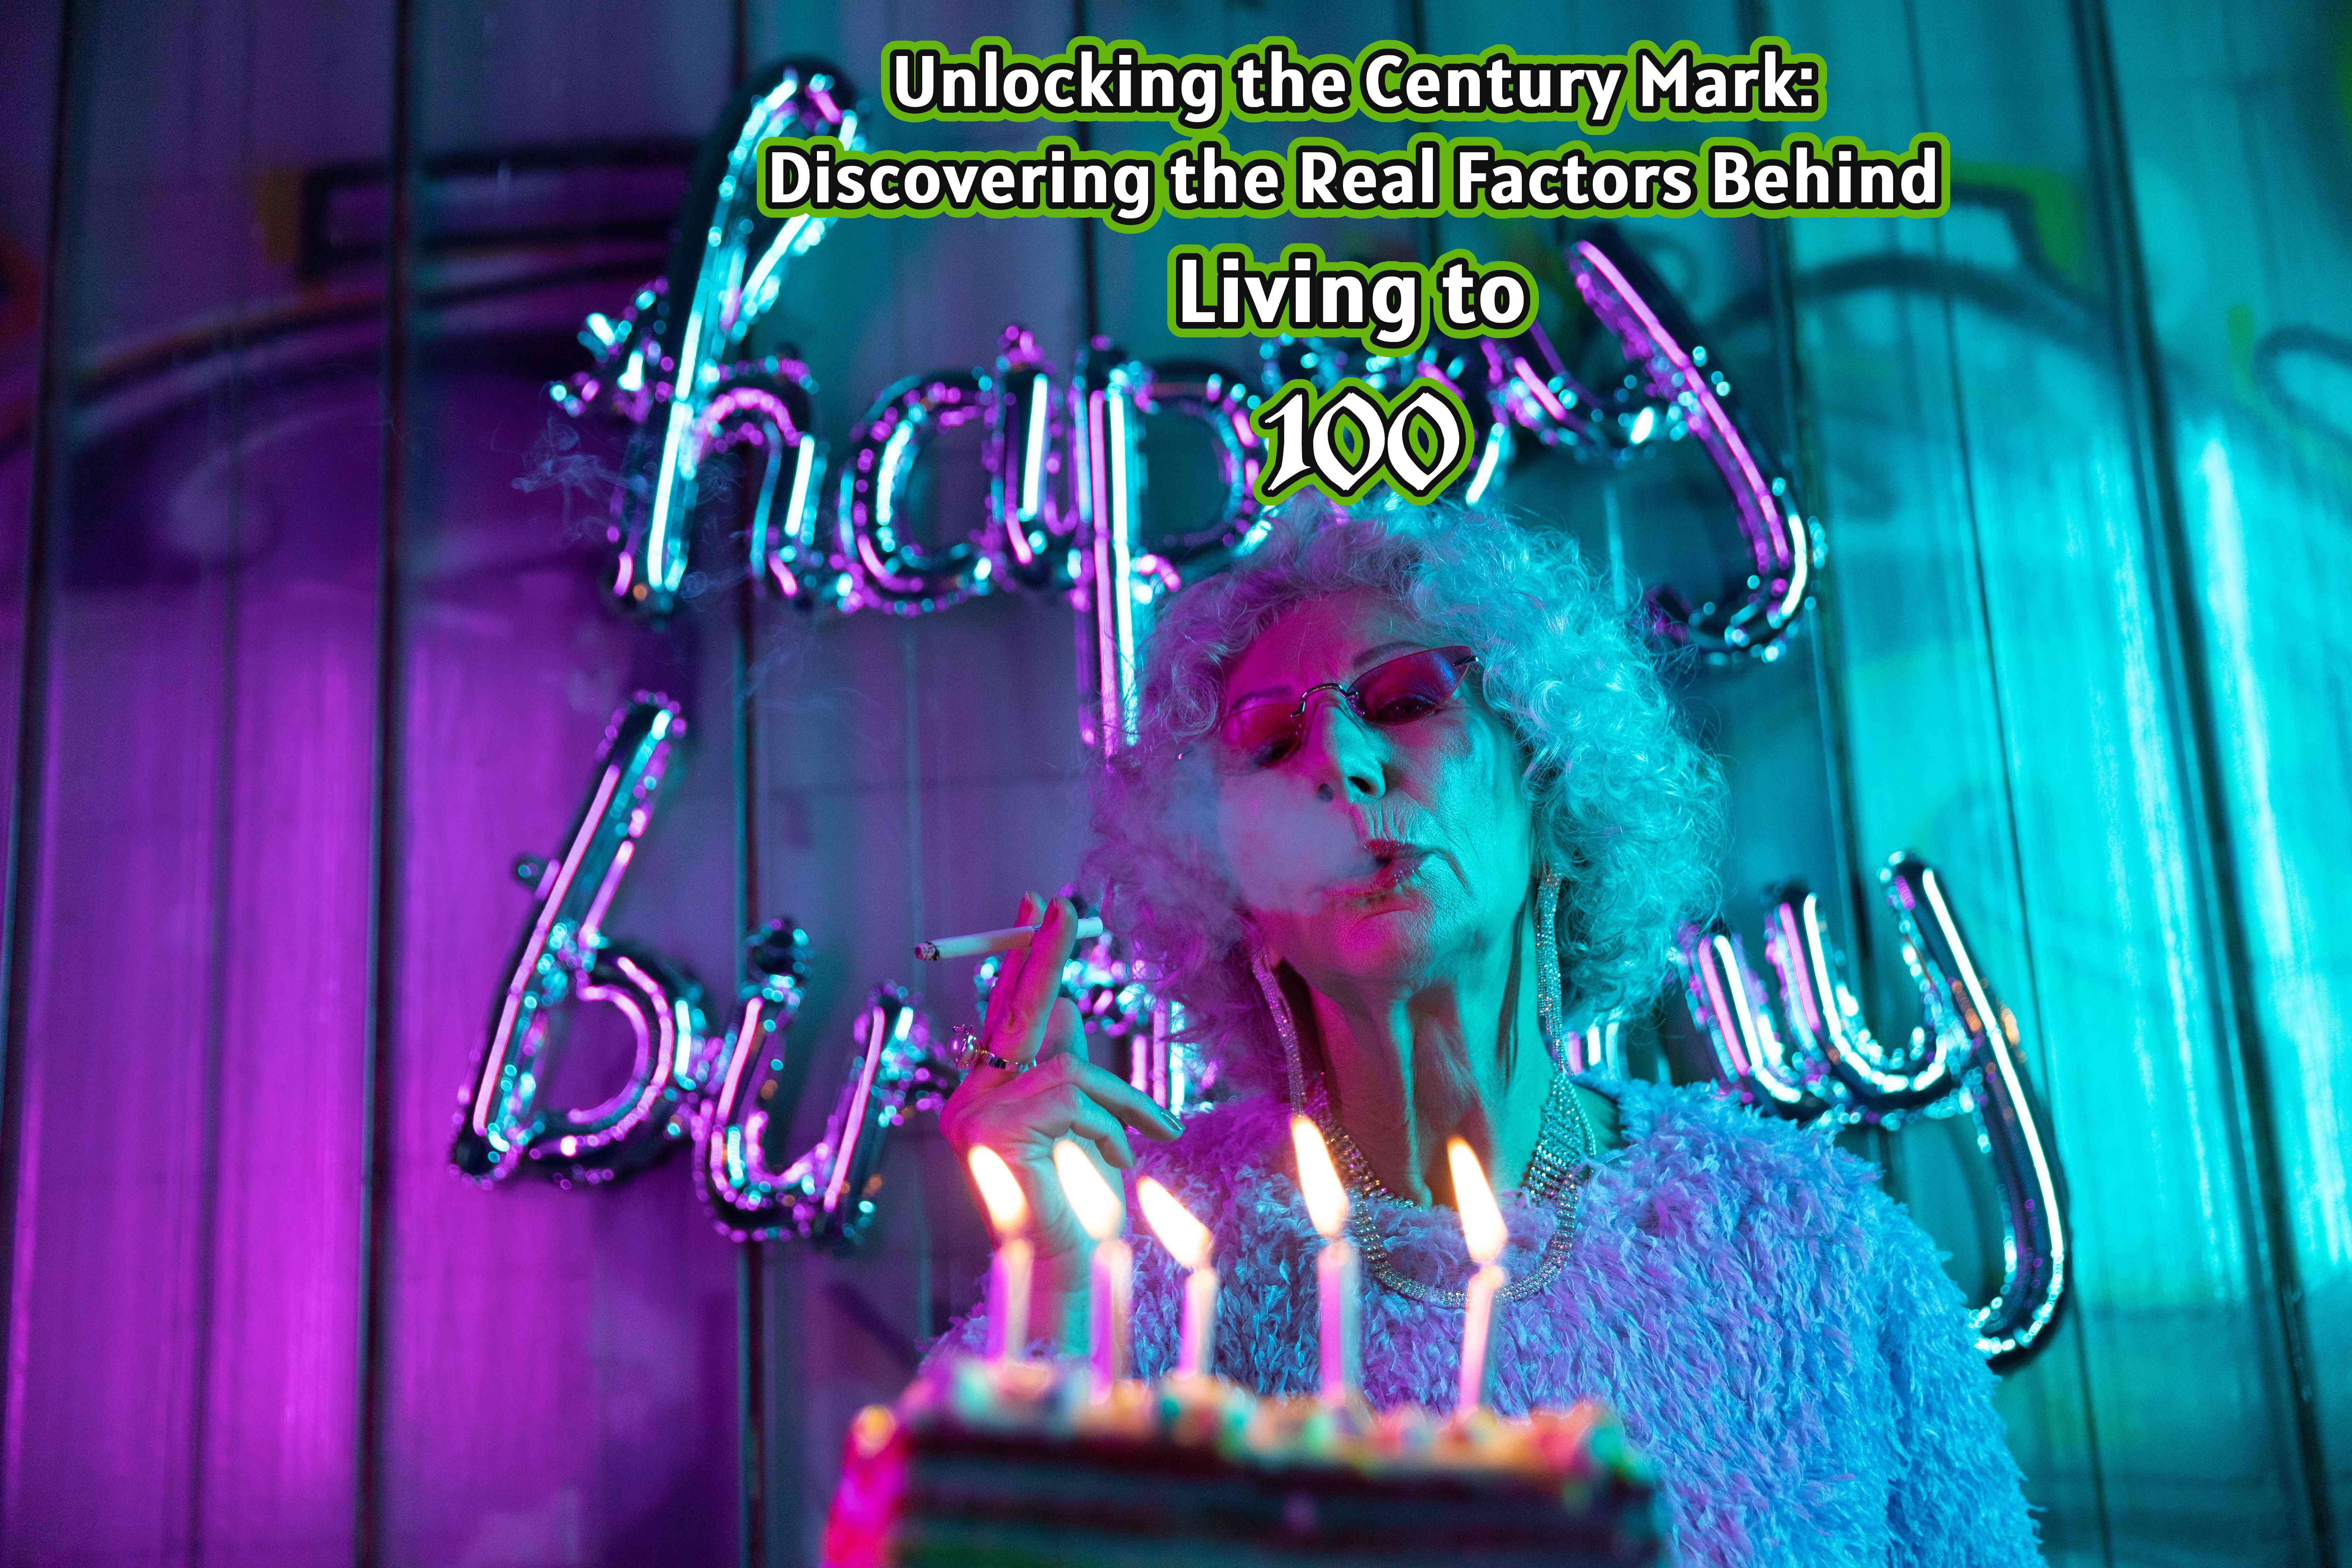 Unlocking the Century Mark: Discovering the Real Factors Behind Living to 100